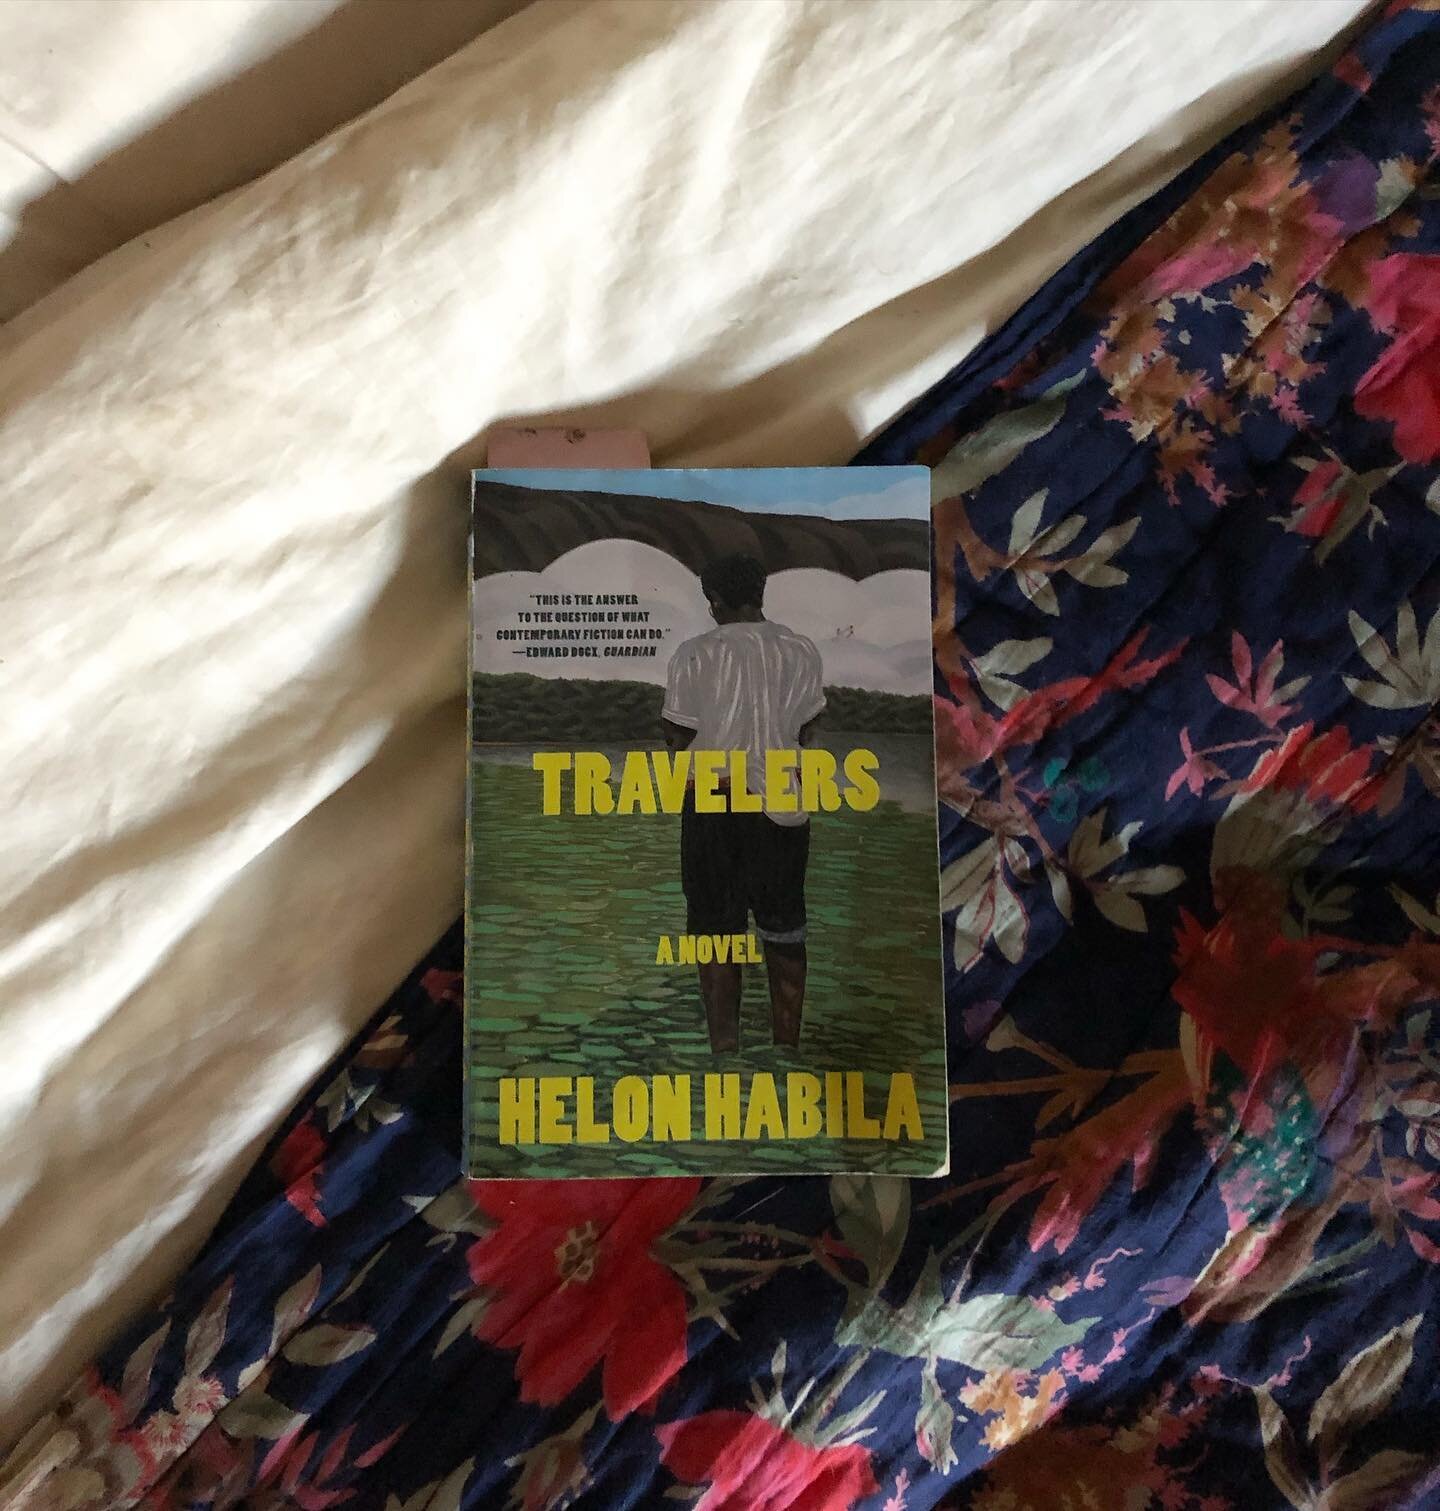 I think I had been waiting for this novel without realizing it &mdash; interwoven stories of African immigrants and refugees passing through Berlin, their loves and losses, with a narrator whose own experience is heartbreaking and powerful. 

Highly 